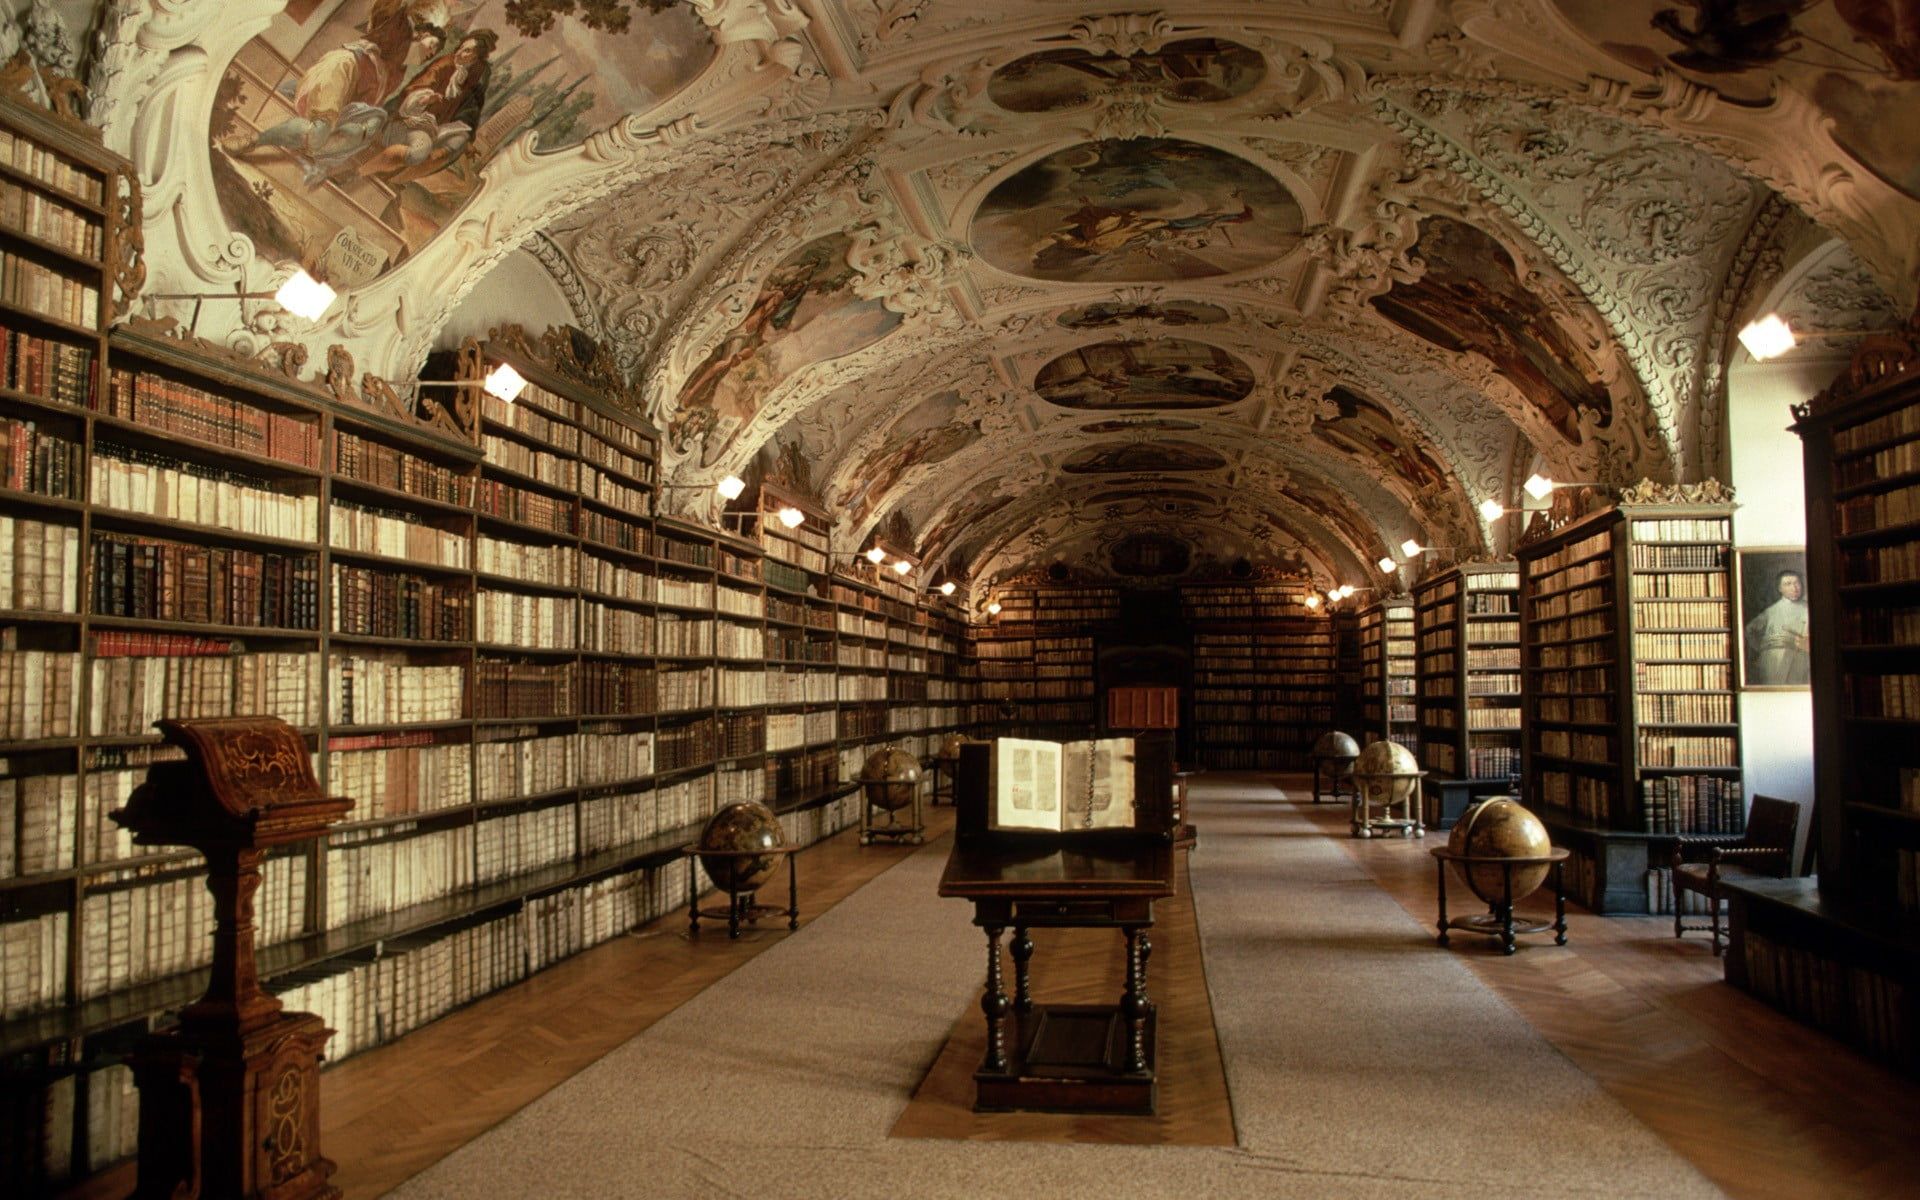 A very large library with many books - Books, library